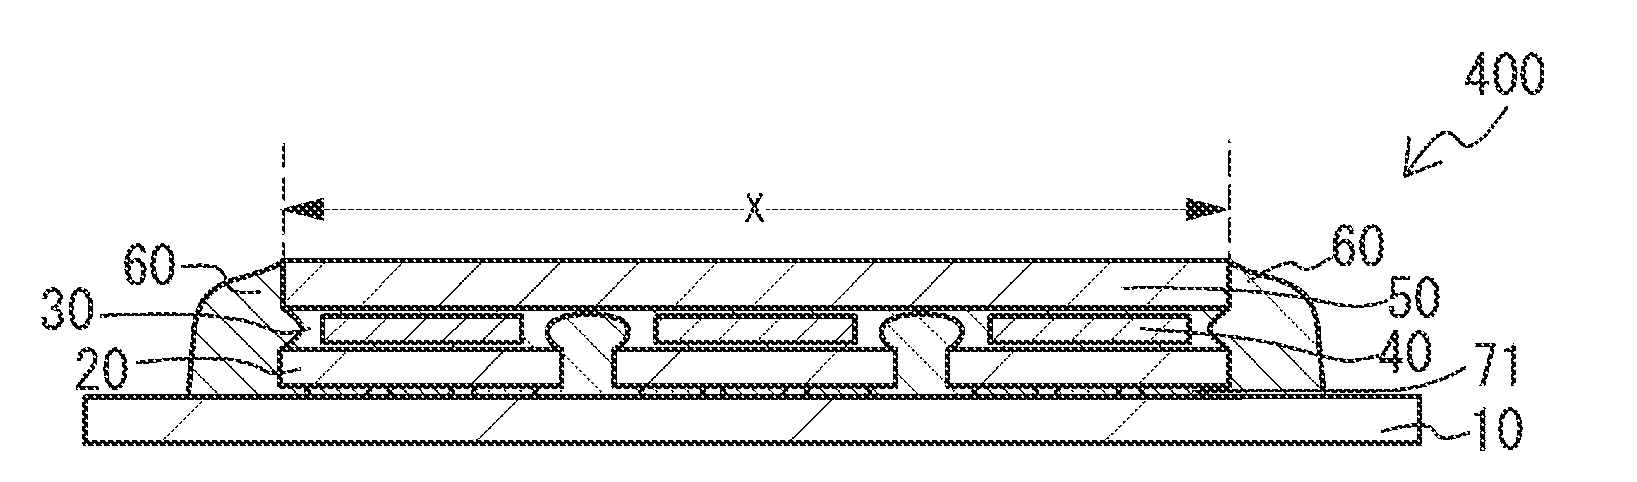 Light emitting device and method of manufacturing same